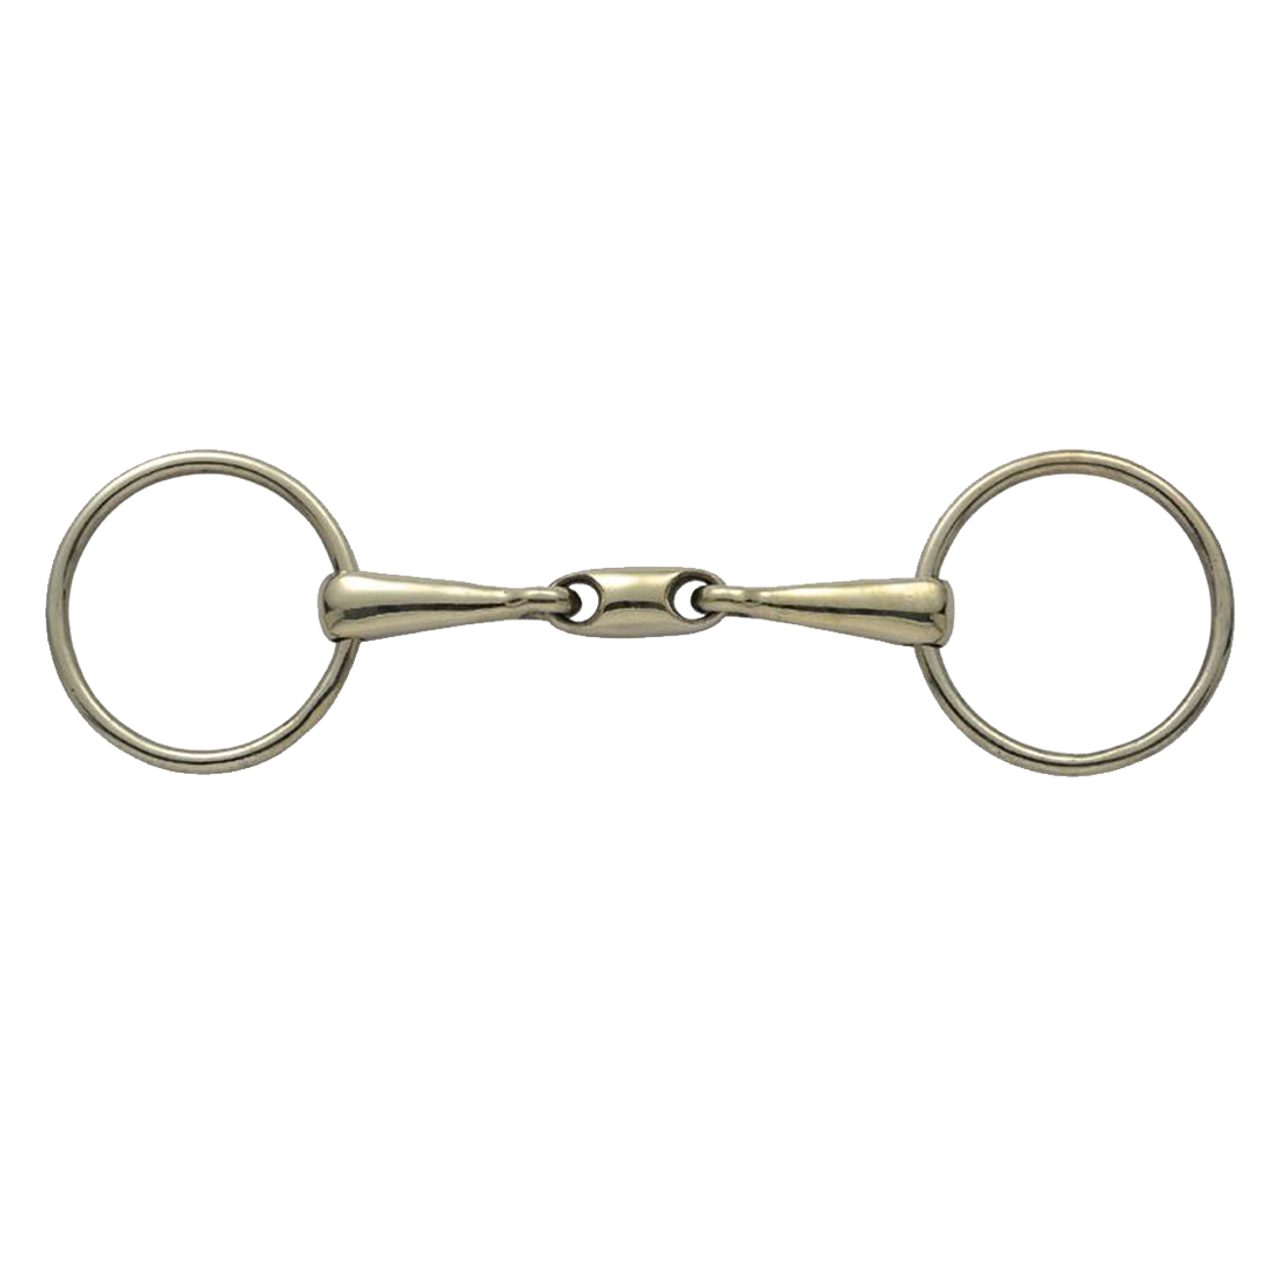 Shires French Link Loose Ring Snaffle